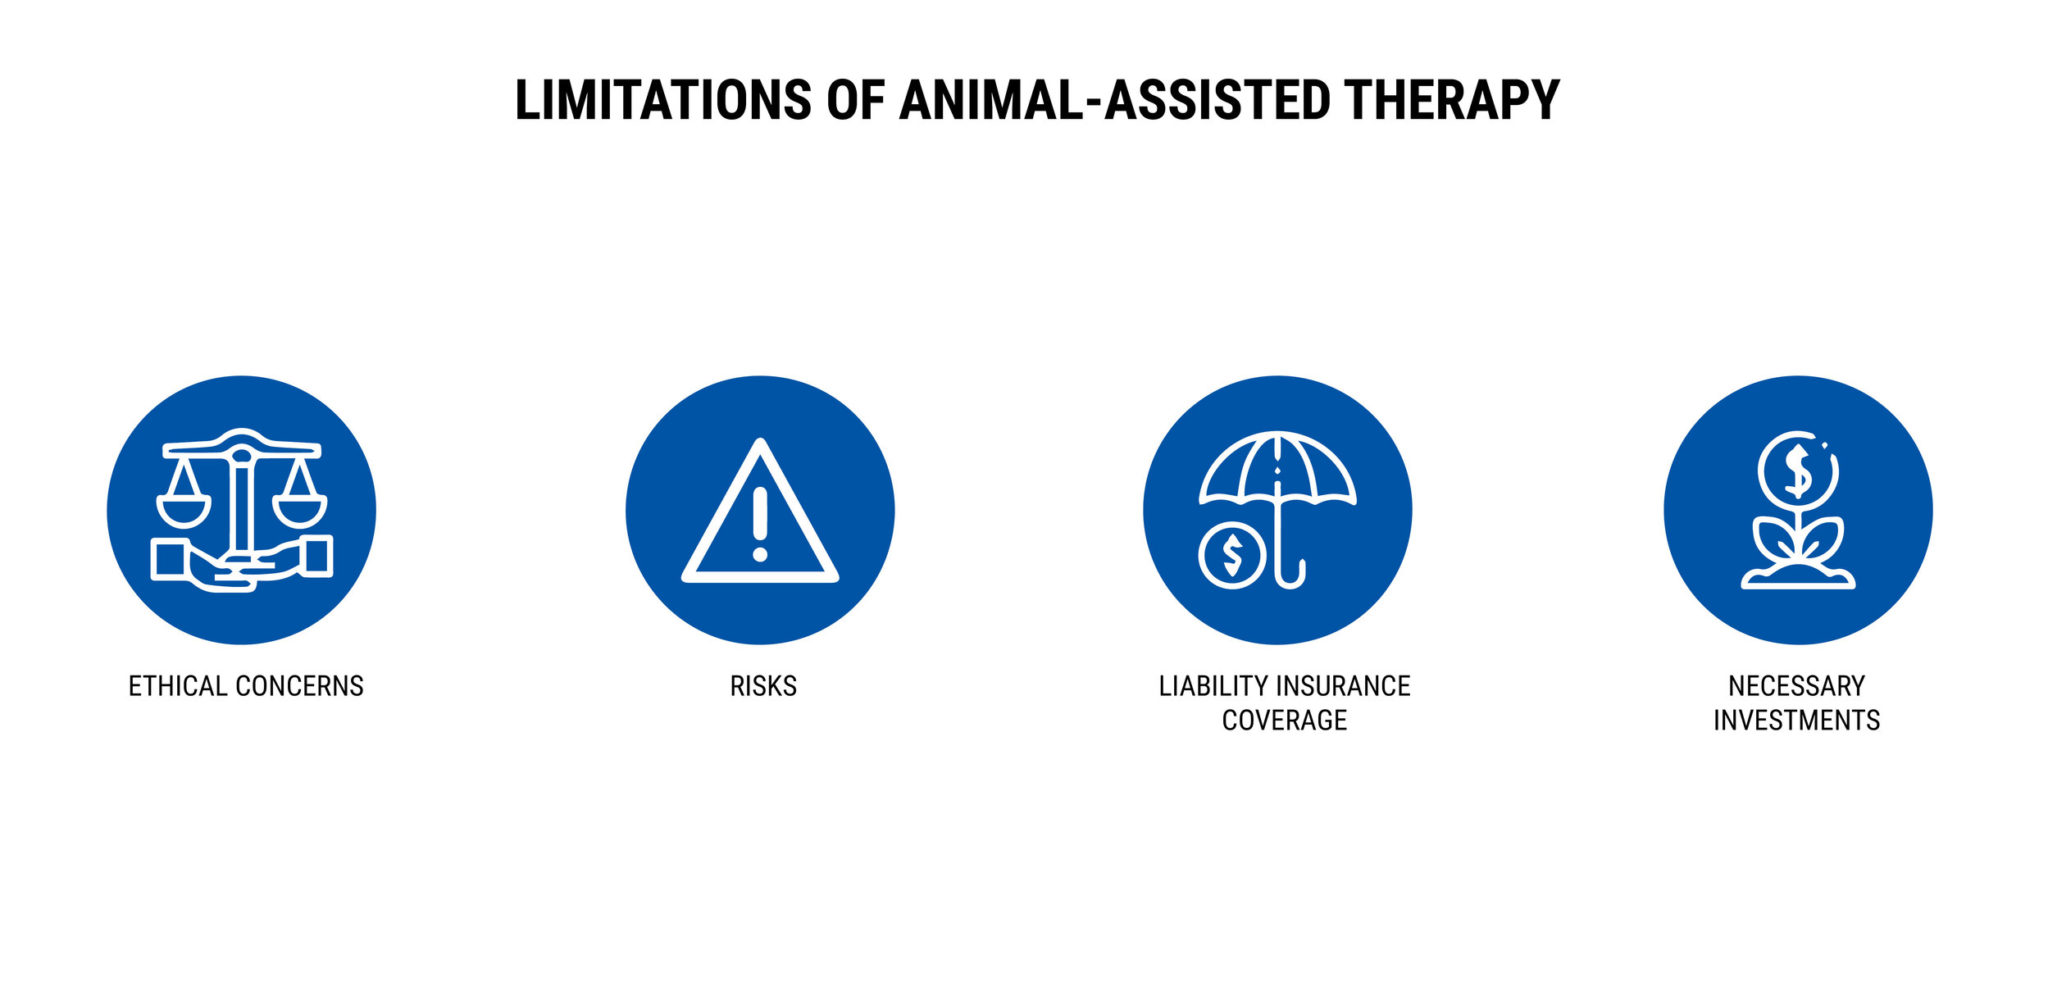 LIMITATIONS OF ANIMAL-ASSISTED THERAPY